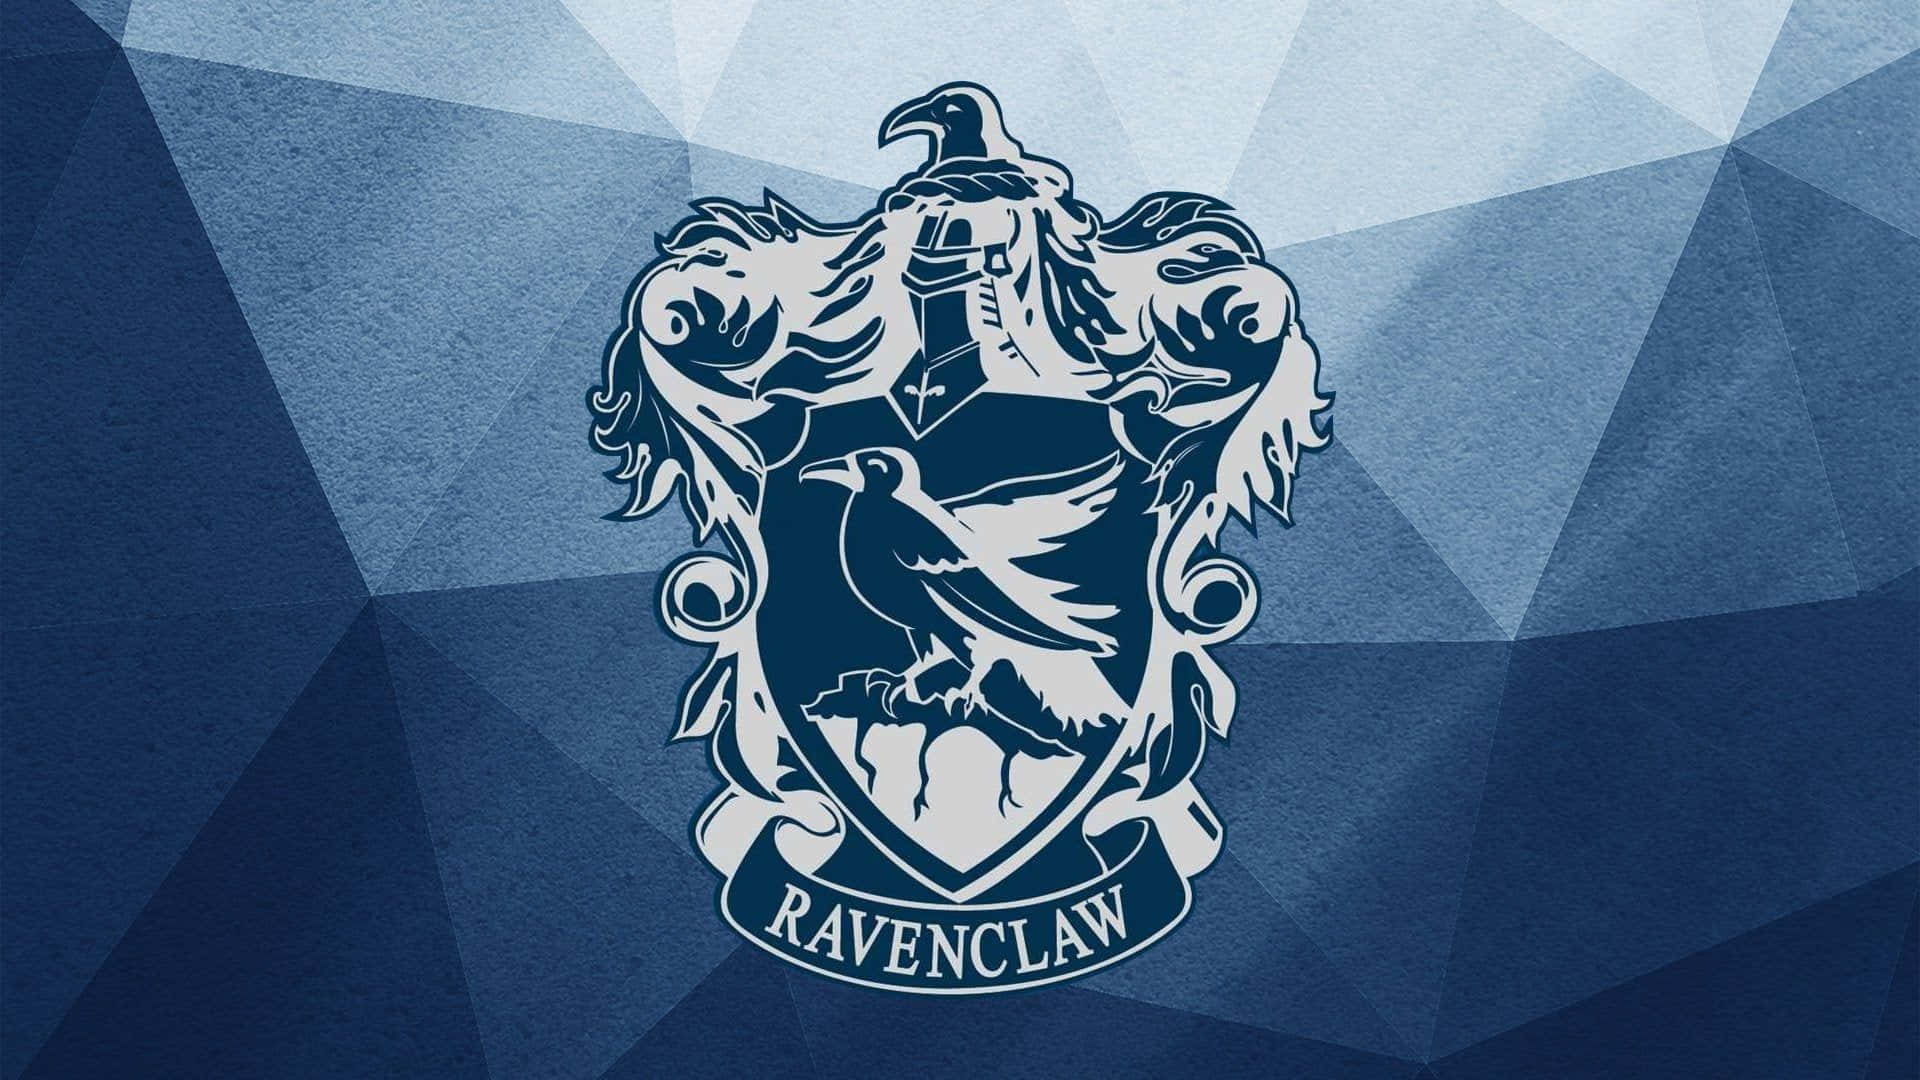 Representing the Wisdom of Ravenclaw Wallpaper